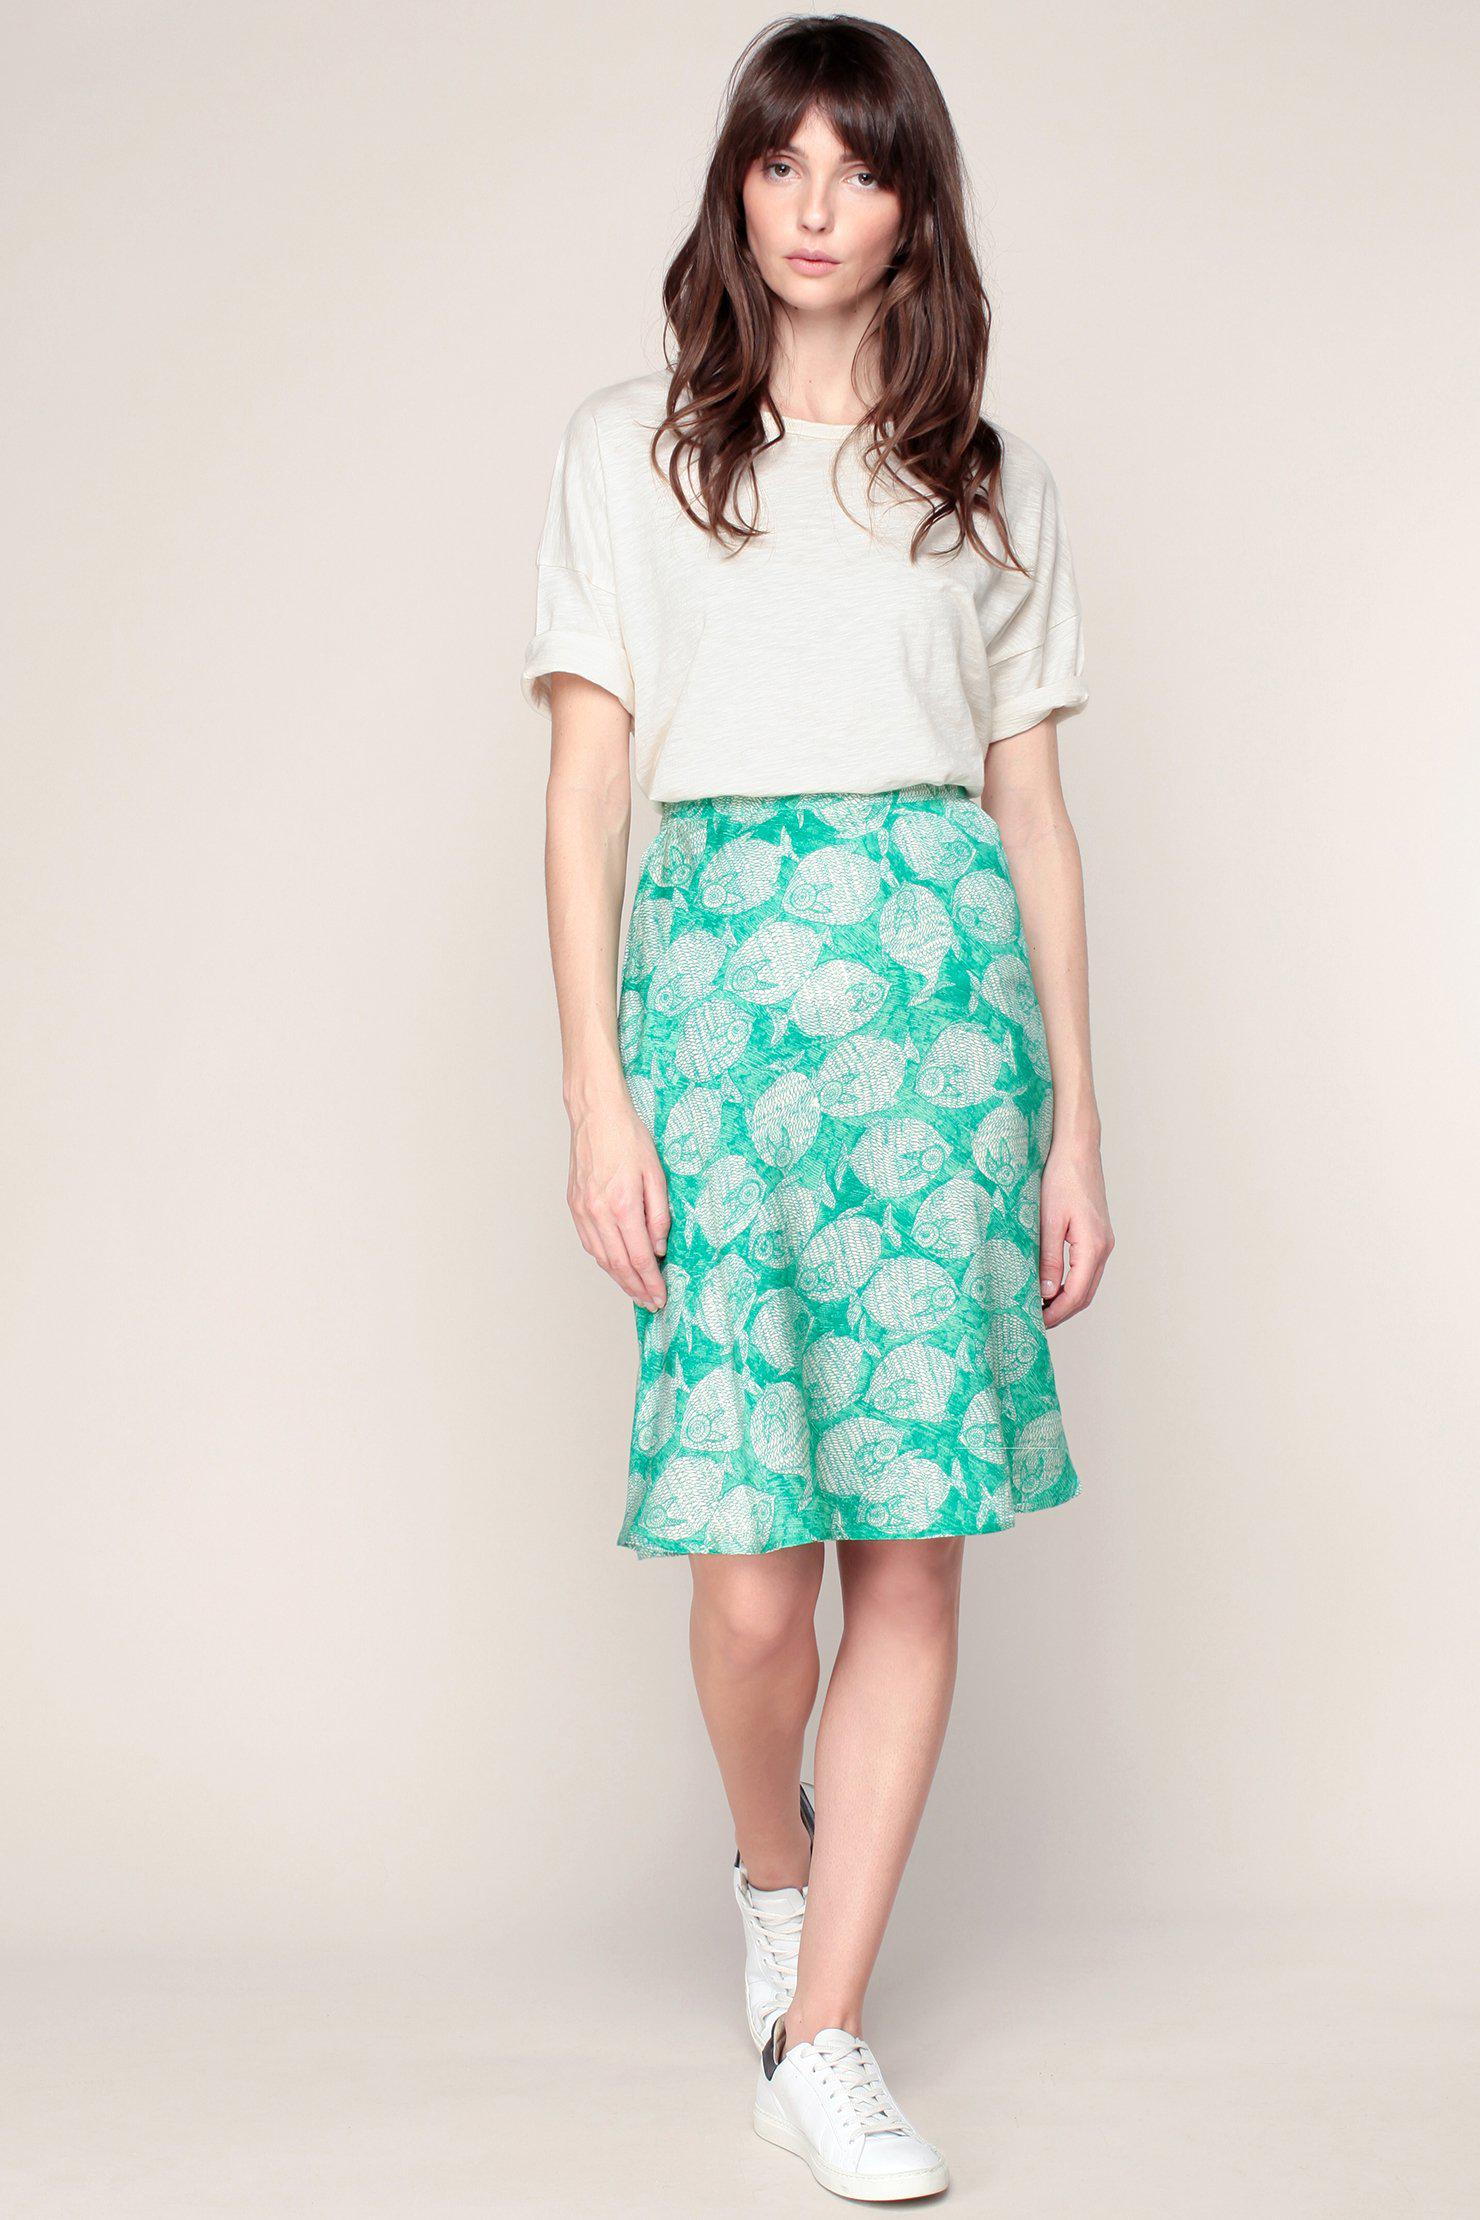 Lyst - King Louie Mid-length Skirt in Green